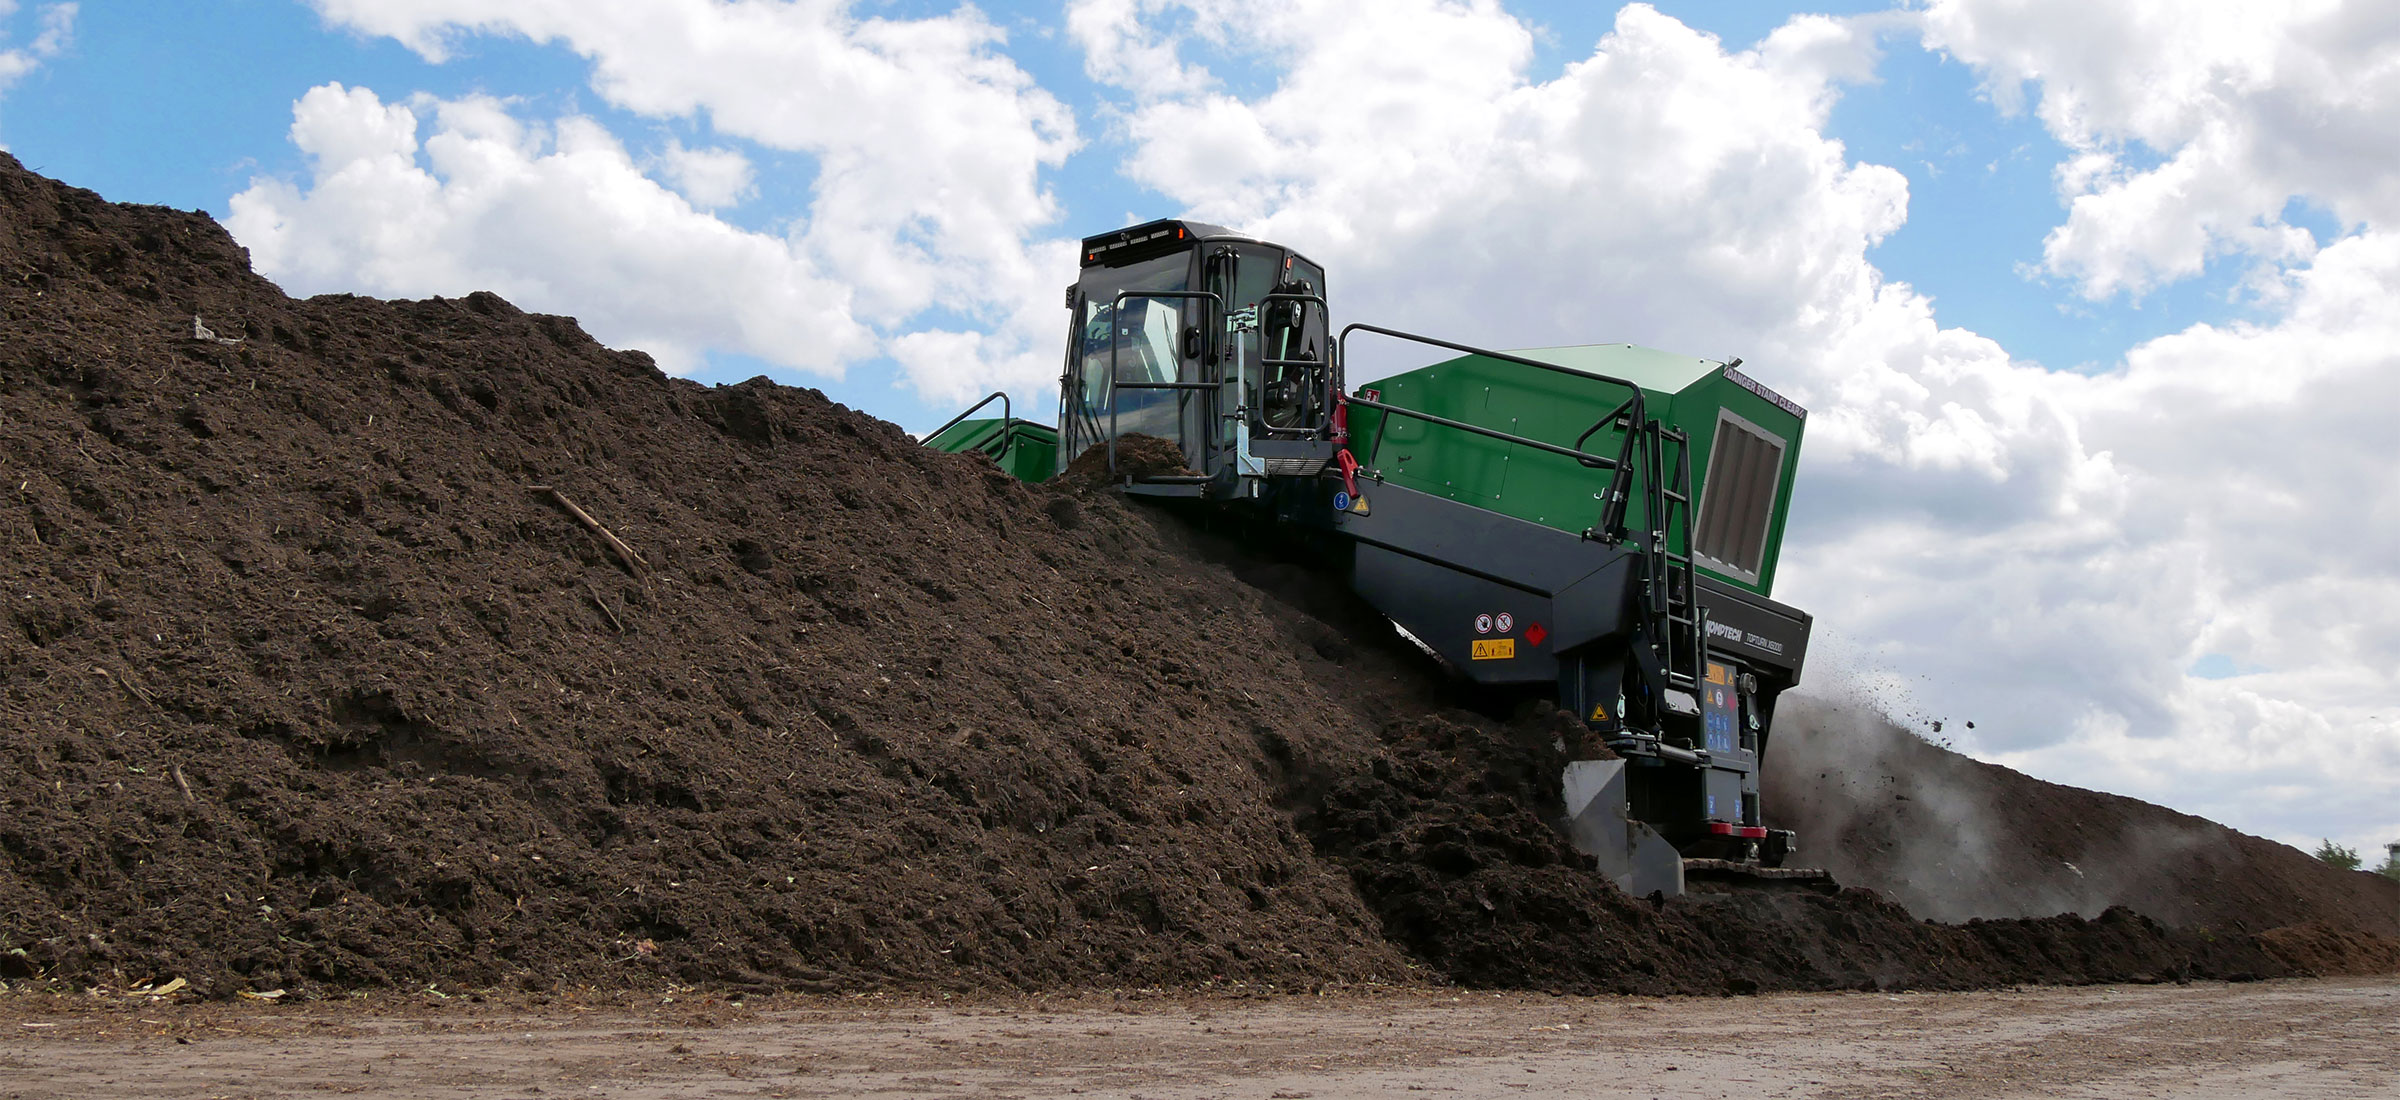 The Komptech Topturn X6000 compost turner creating a tall, peaked windrow.